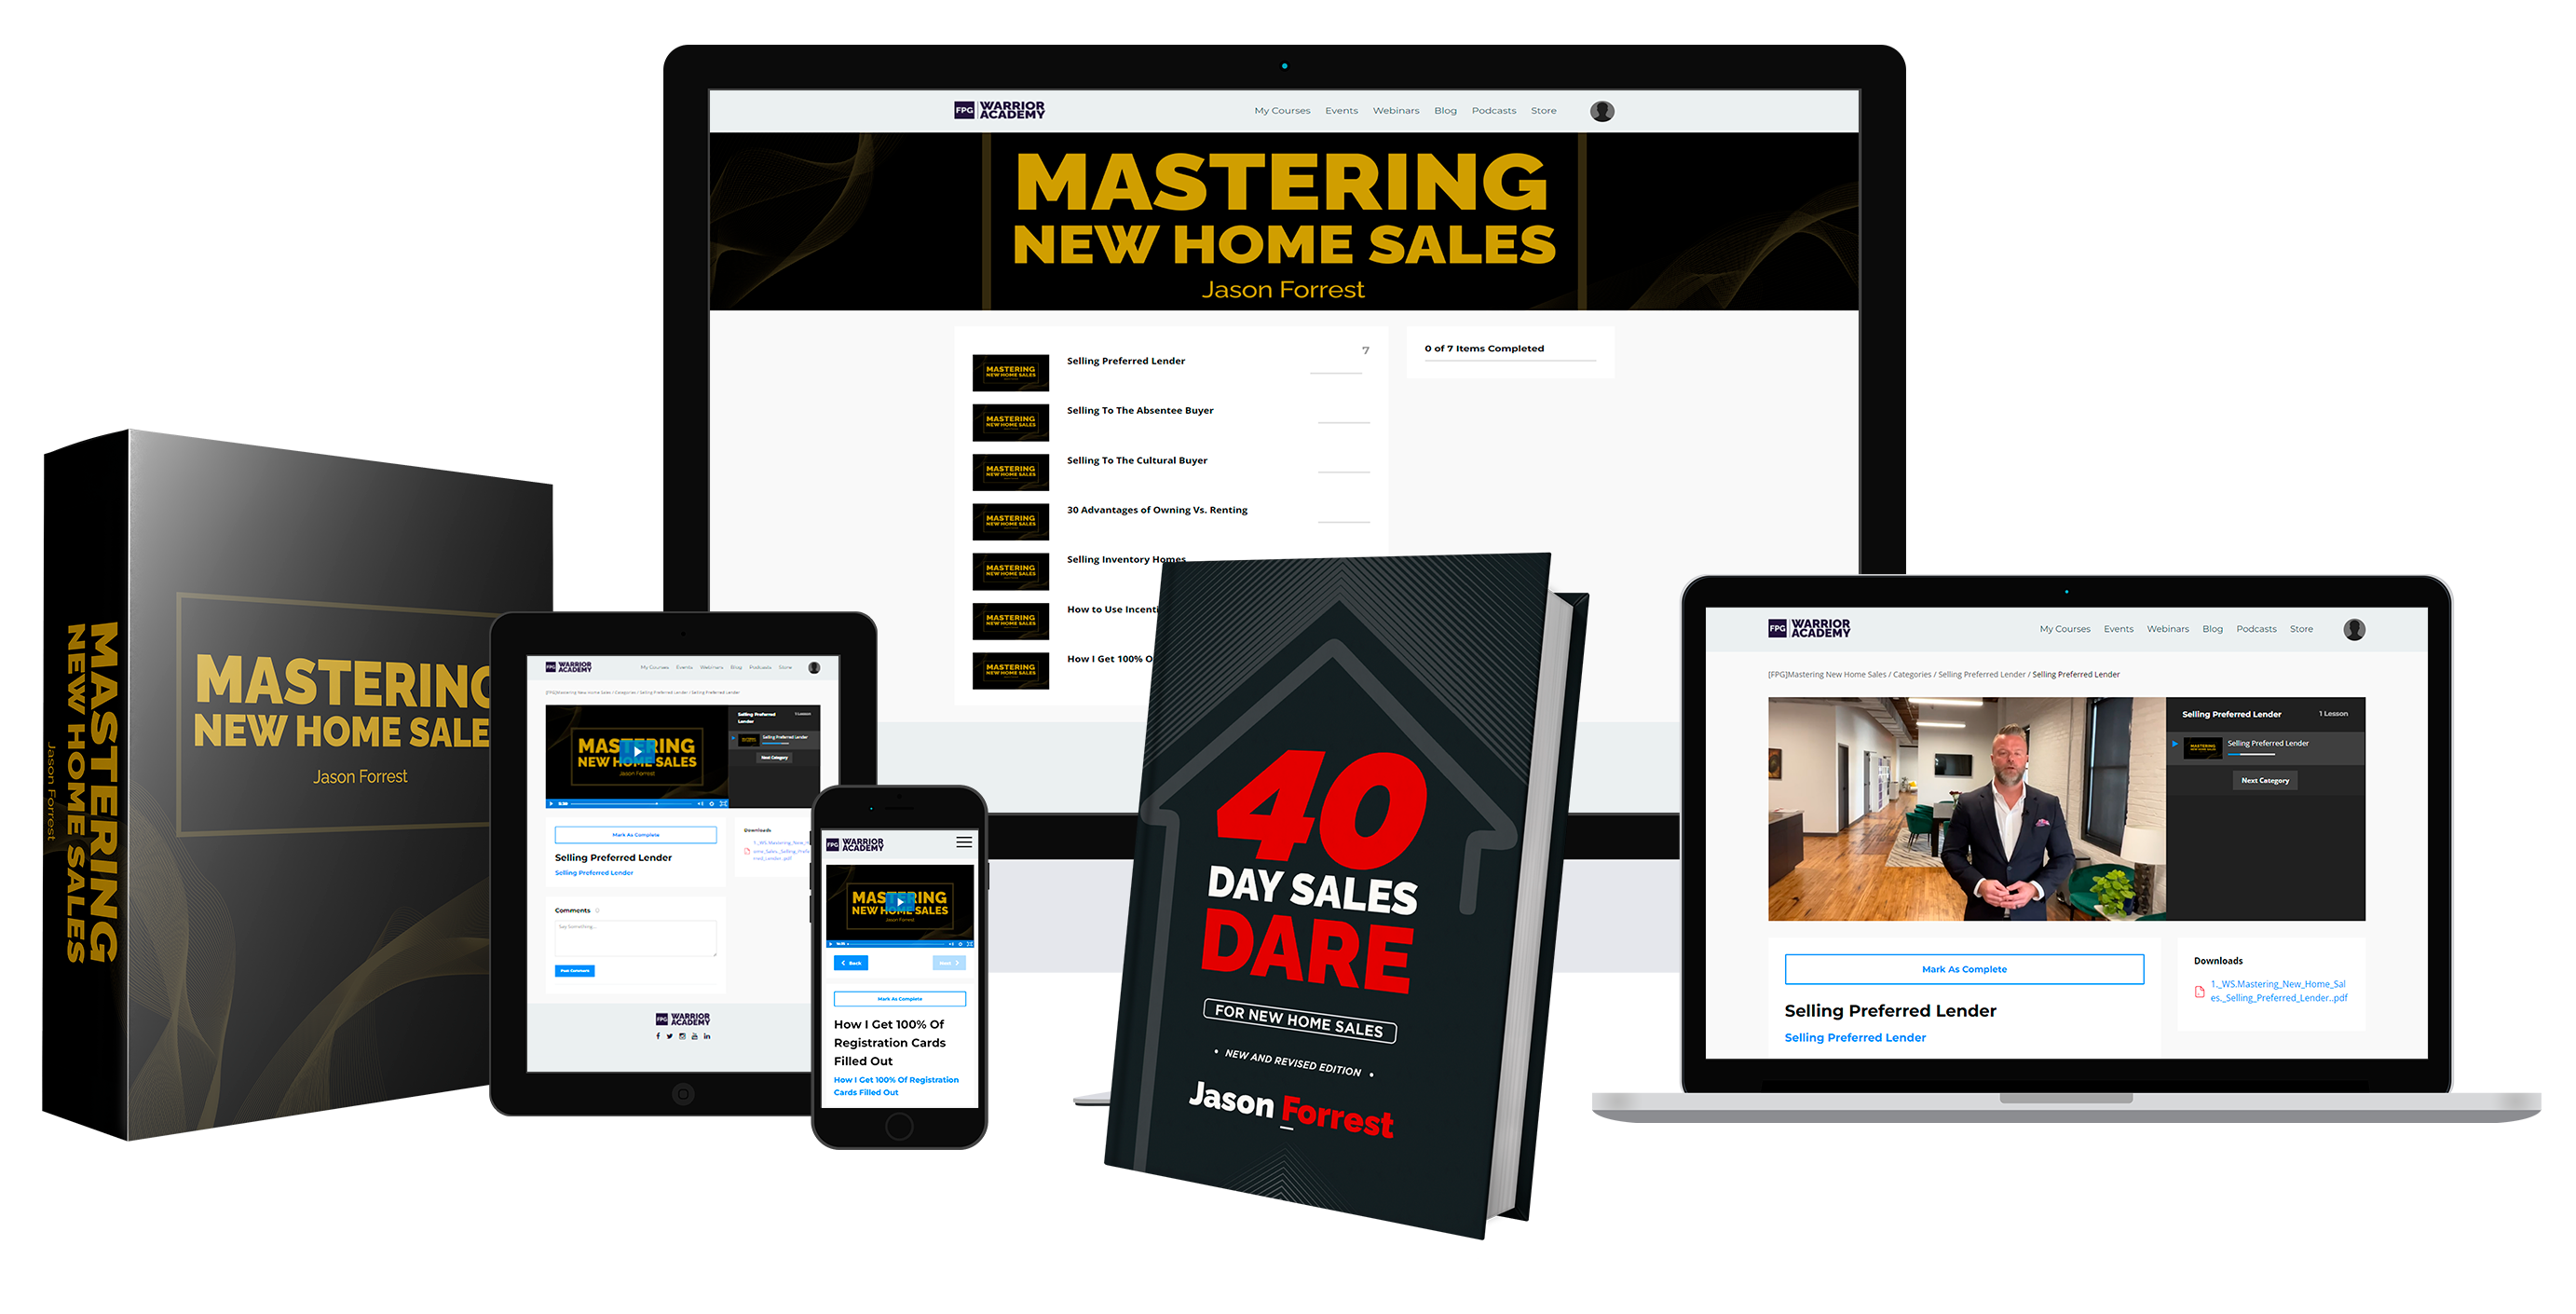 MASTERING NEW HOME SALES